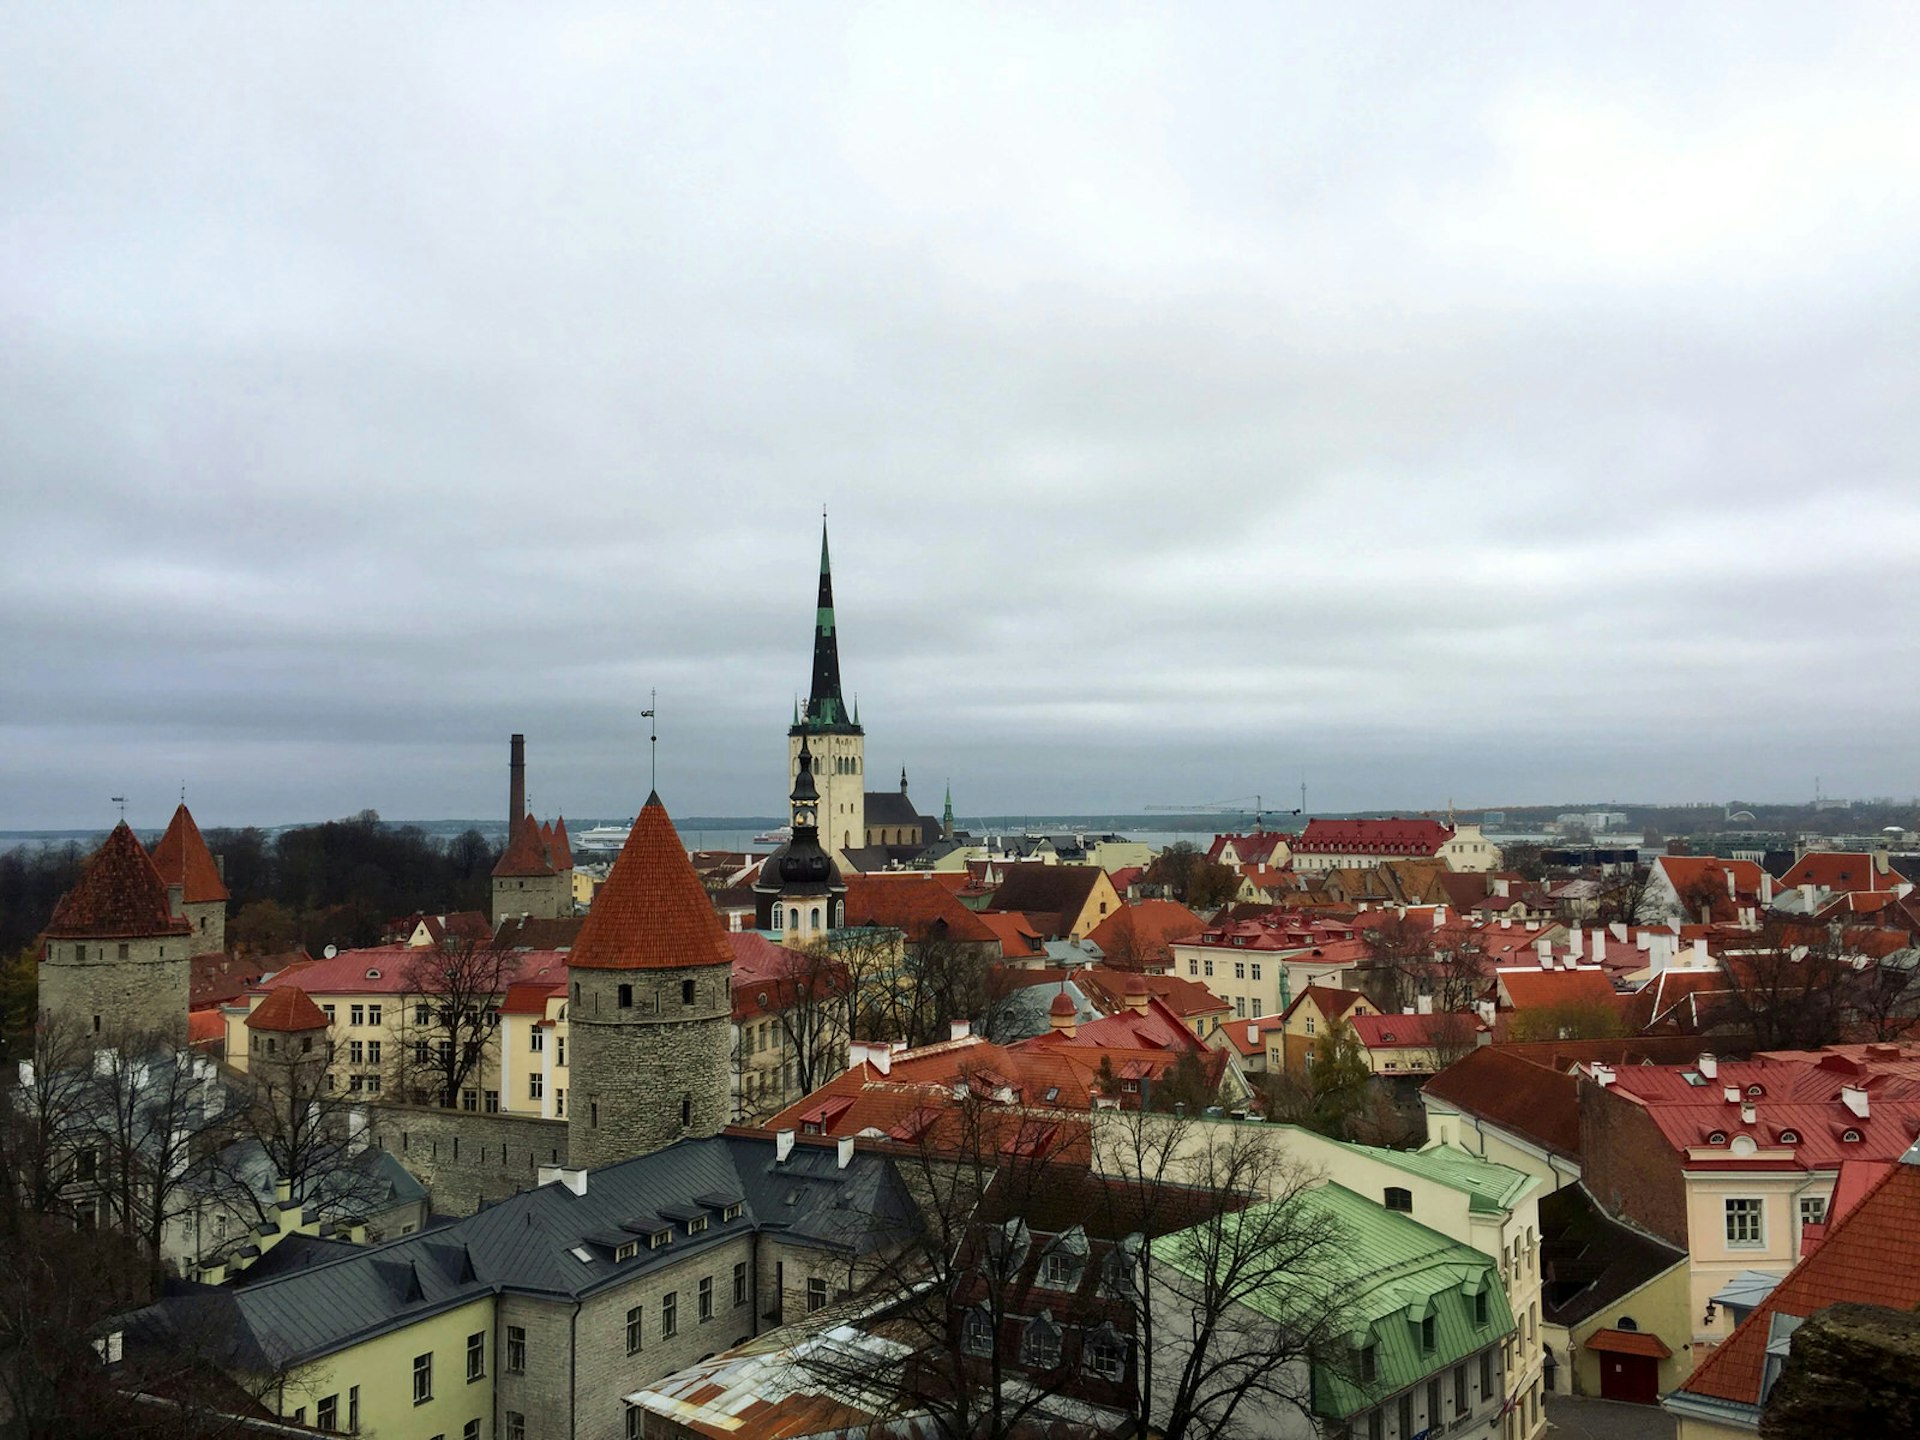 View of spires and red-tiled rooftops of old town Tallinn